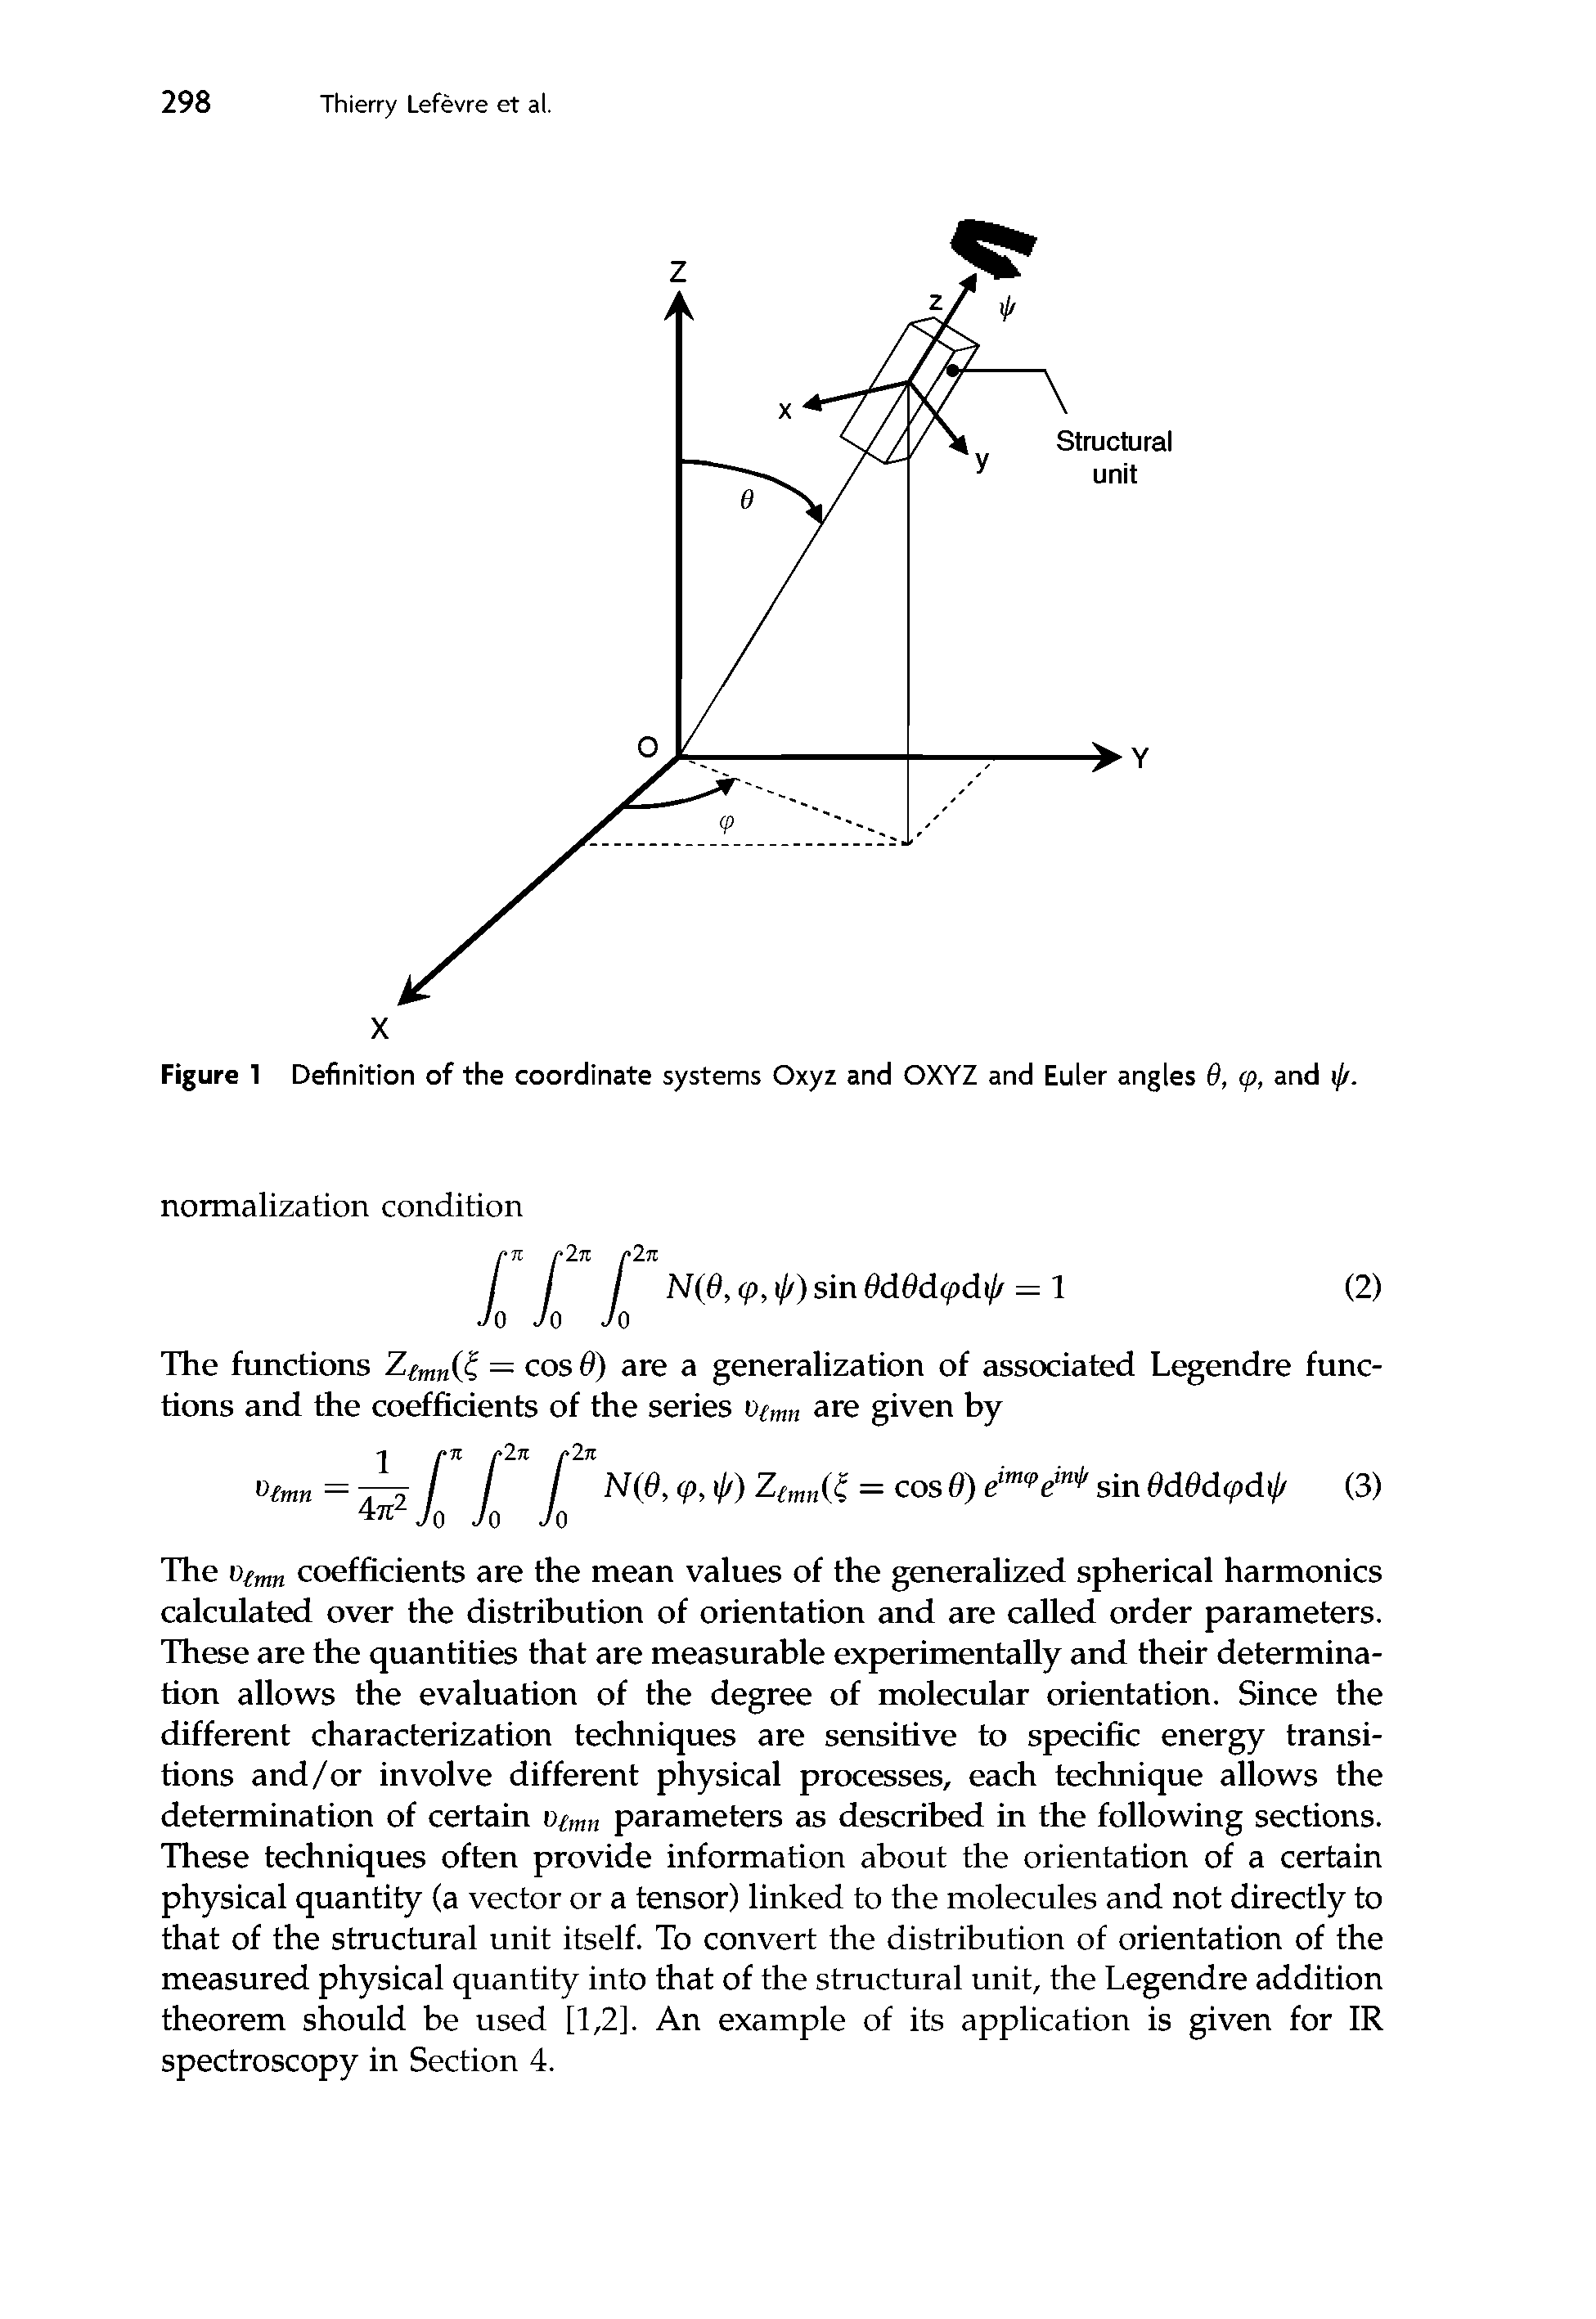 Figure 1 Definition of the coordinate systems Oxyz and OXYZ and Euler angles 6, cp, and ij/.